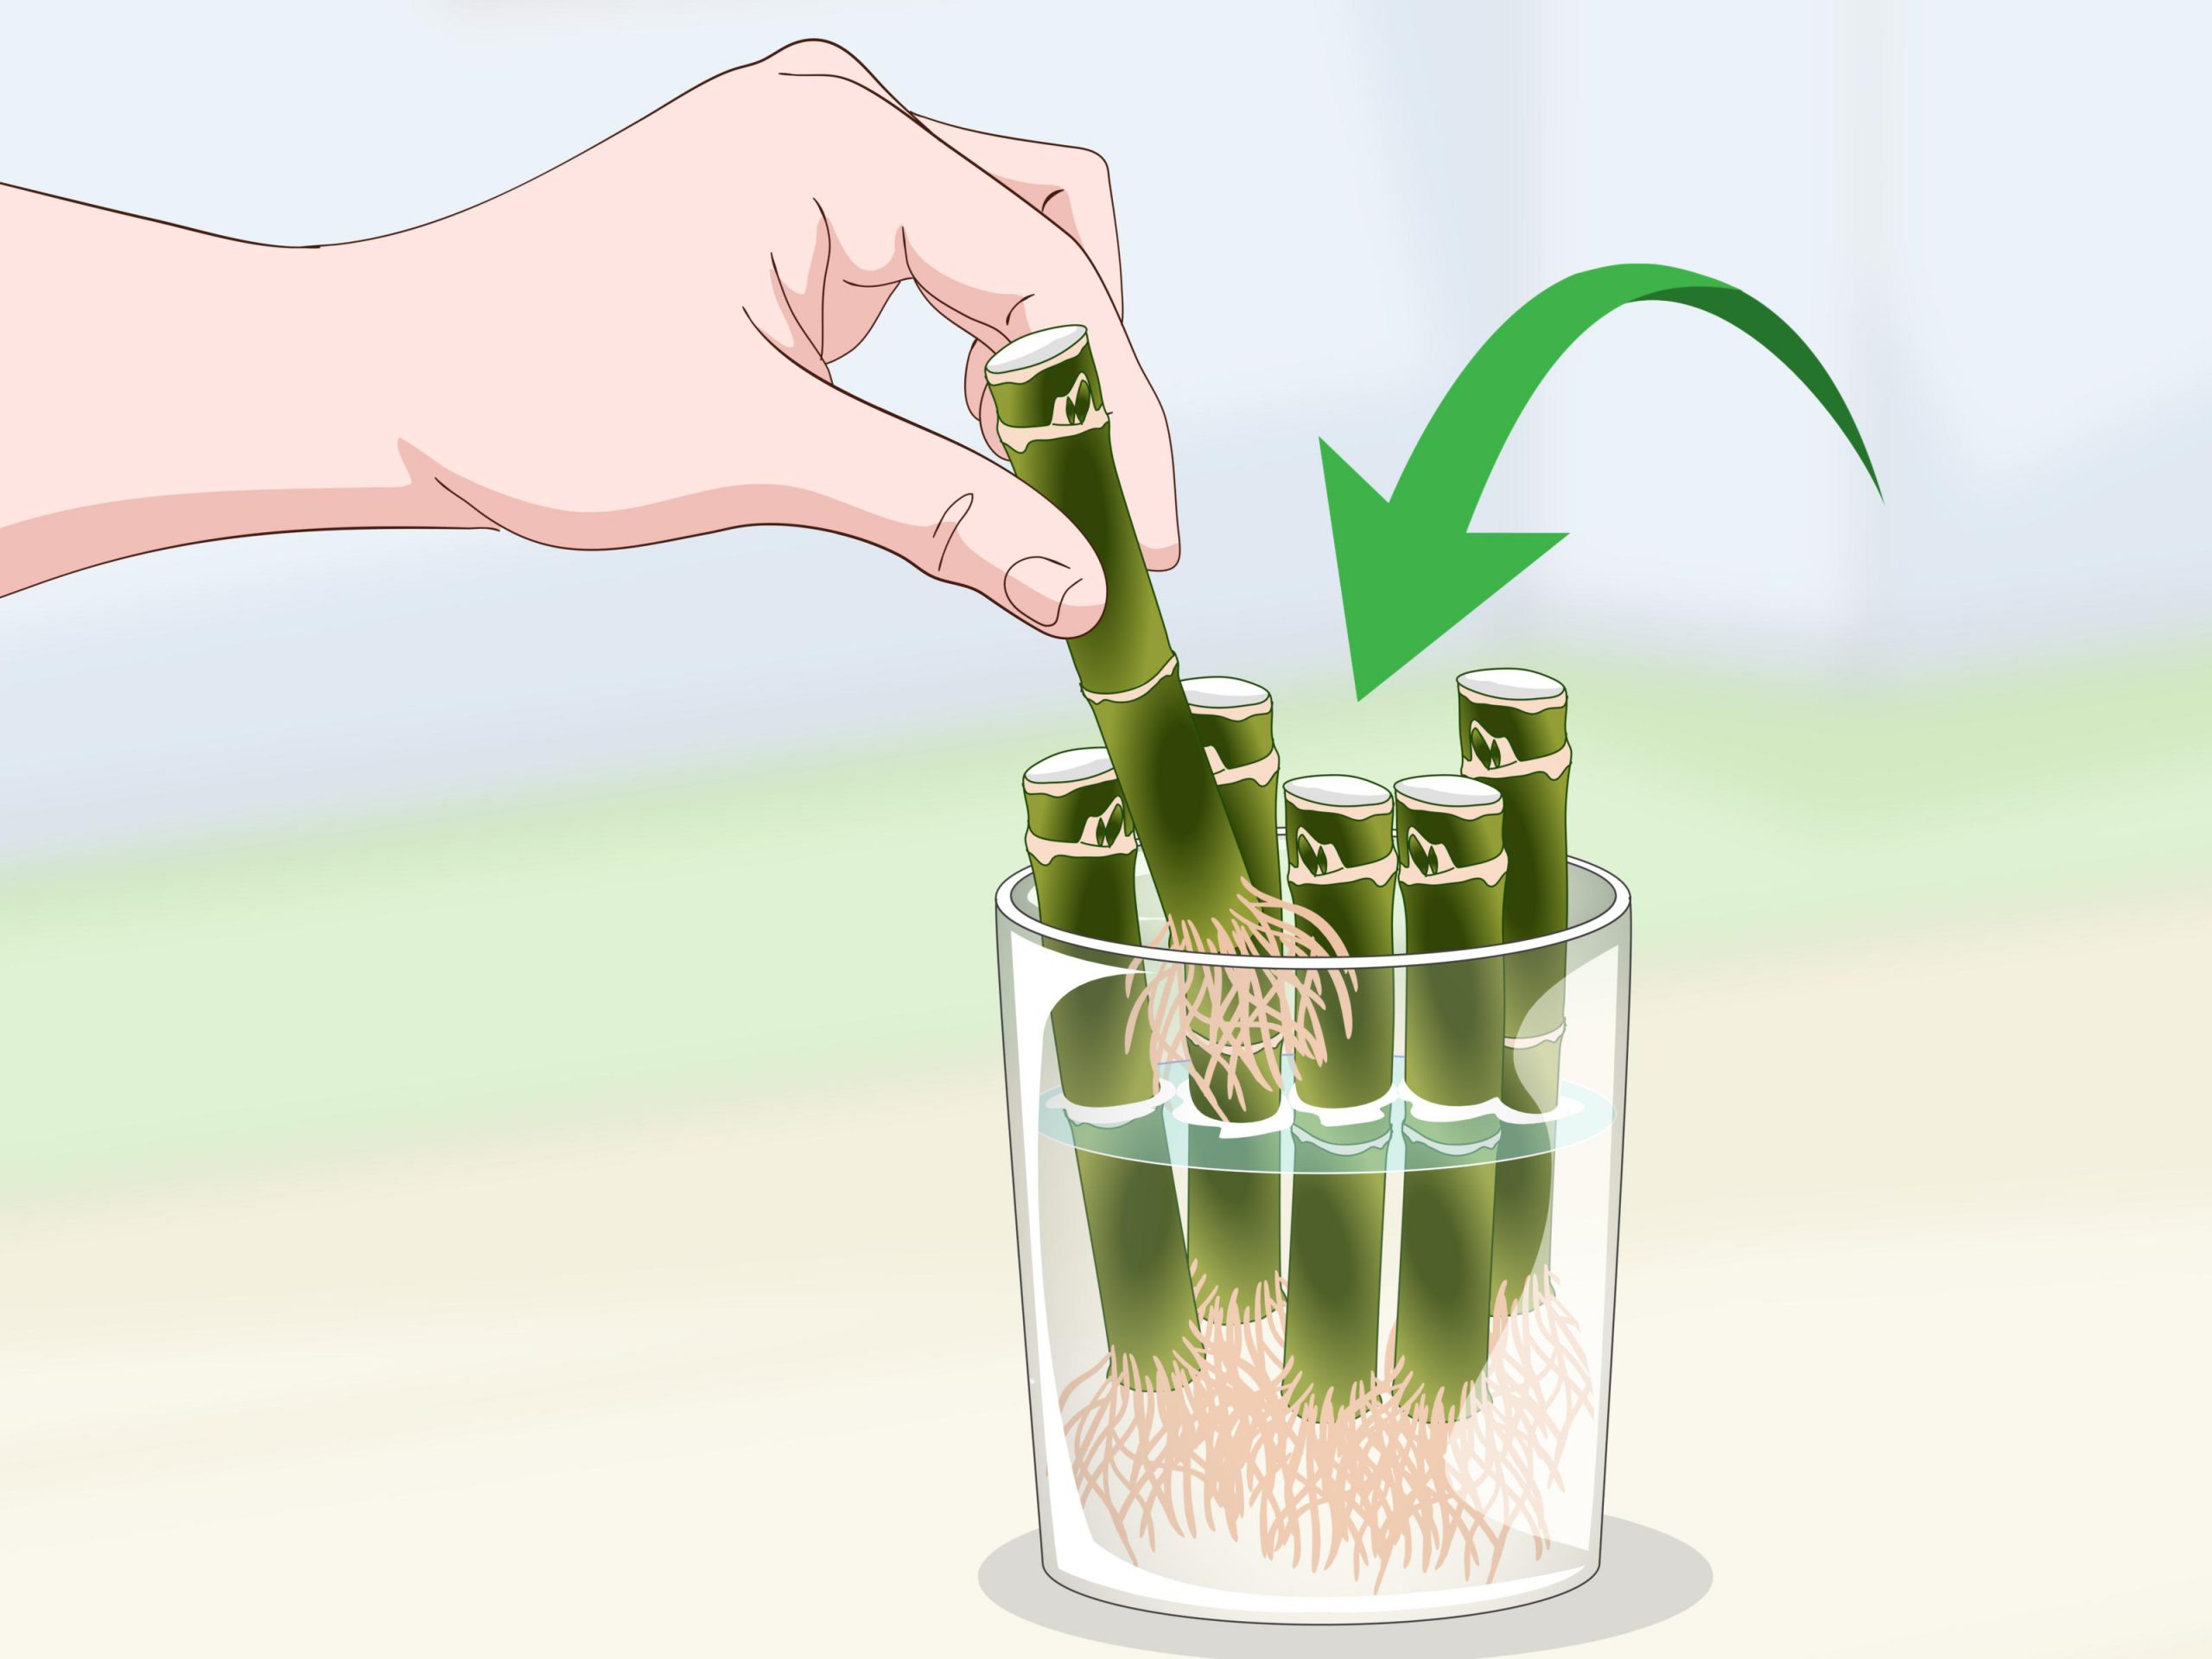 illustration of lucky bamboo propagation stems growing in water